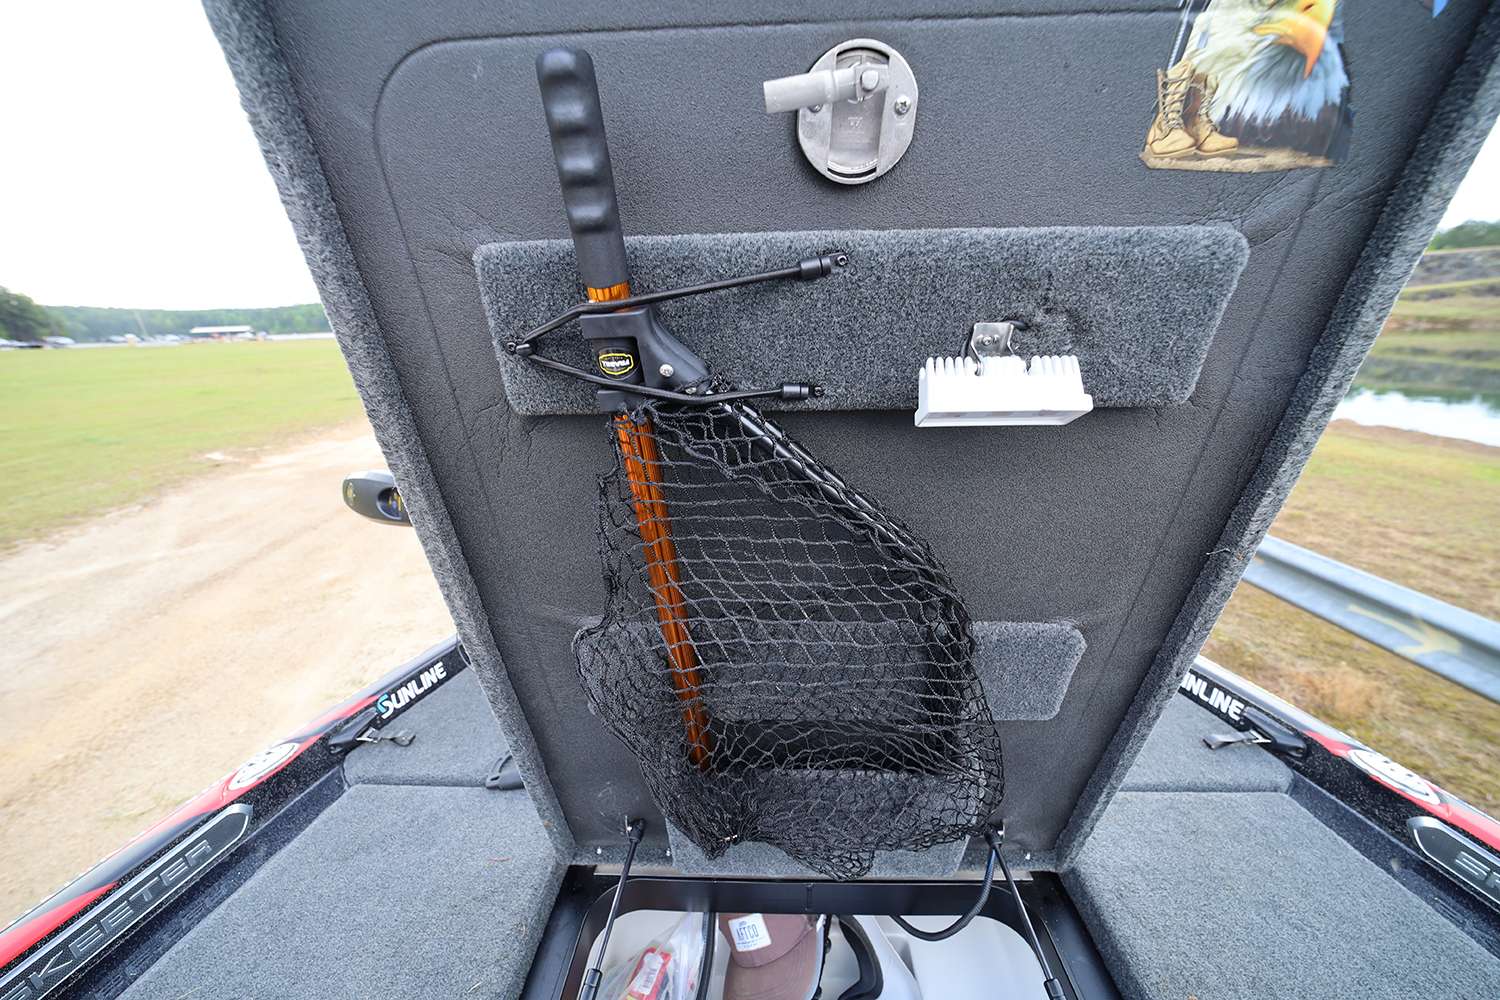 Inside the lid are lights and other items he needs access to. The net comes out of the boat during Elite events. 